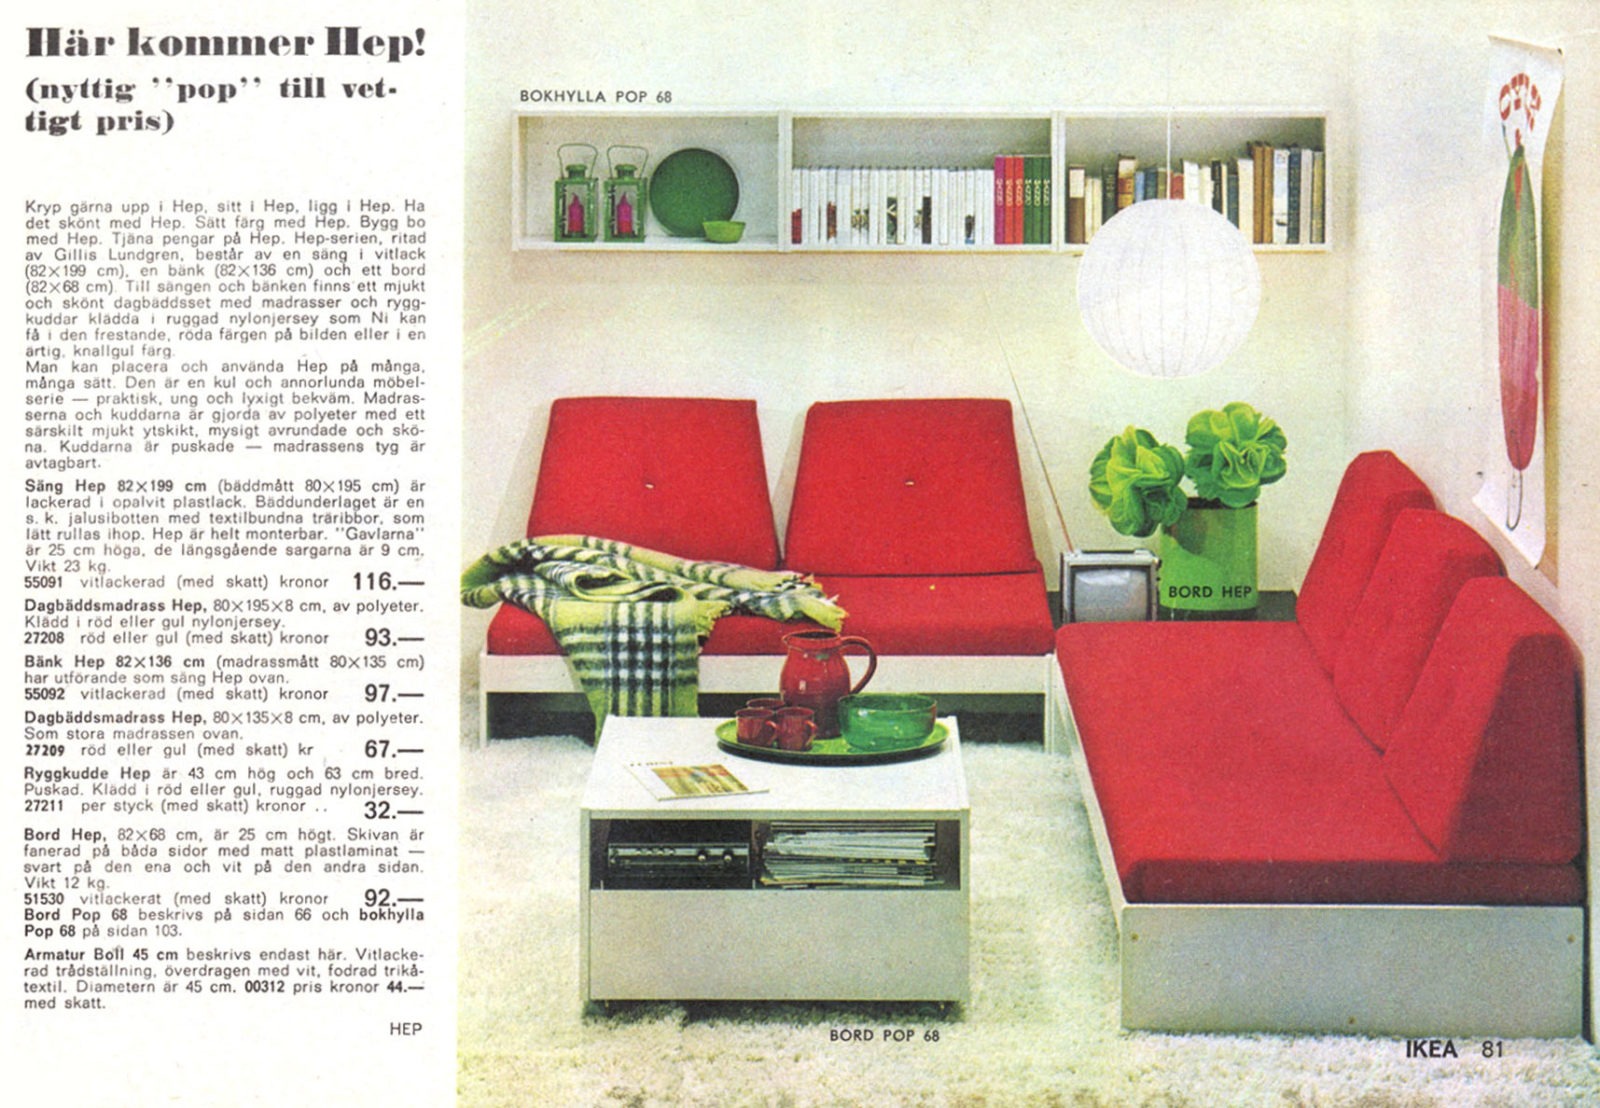 Catalogue page, youthful 1960s decor, low white wooden sofas with bright red cushions, rice lamp and low table on white rug.